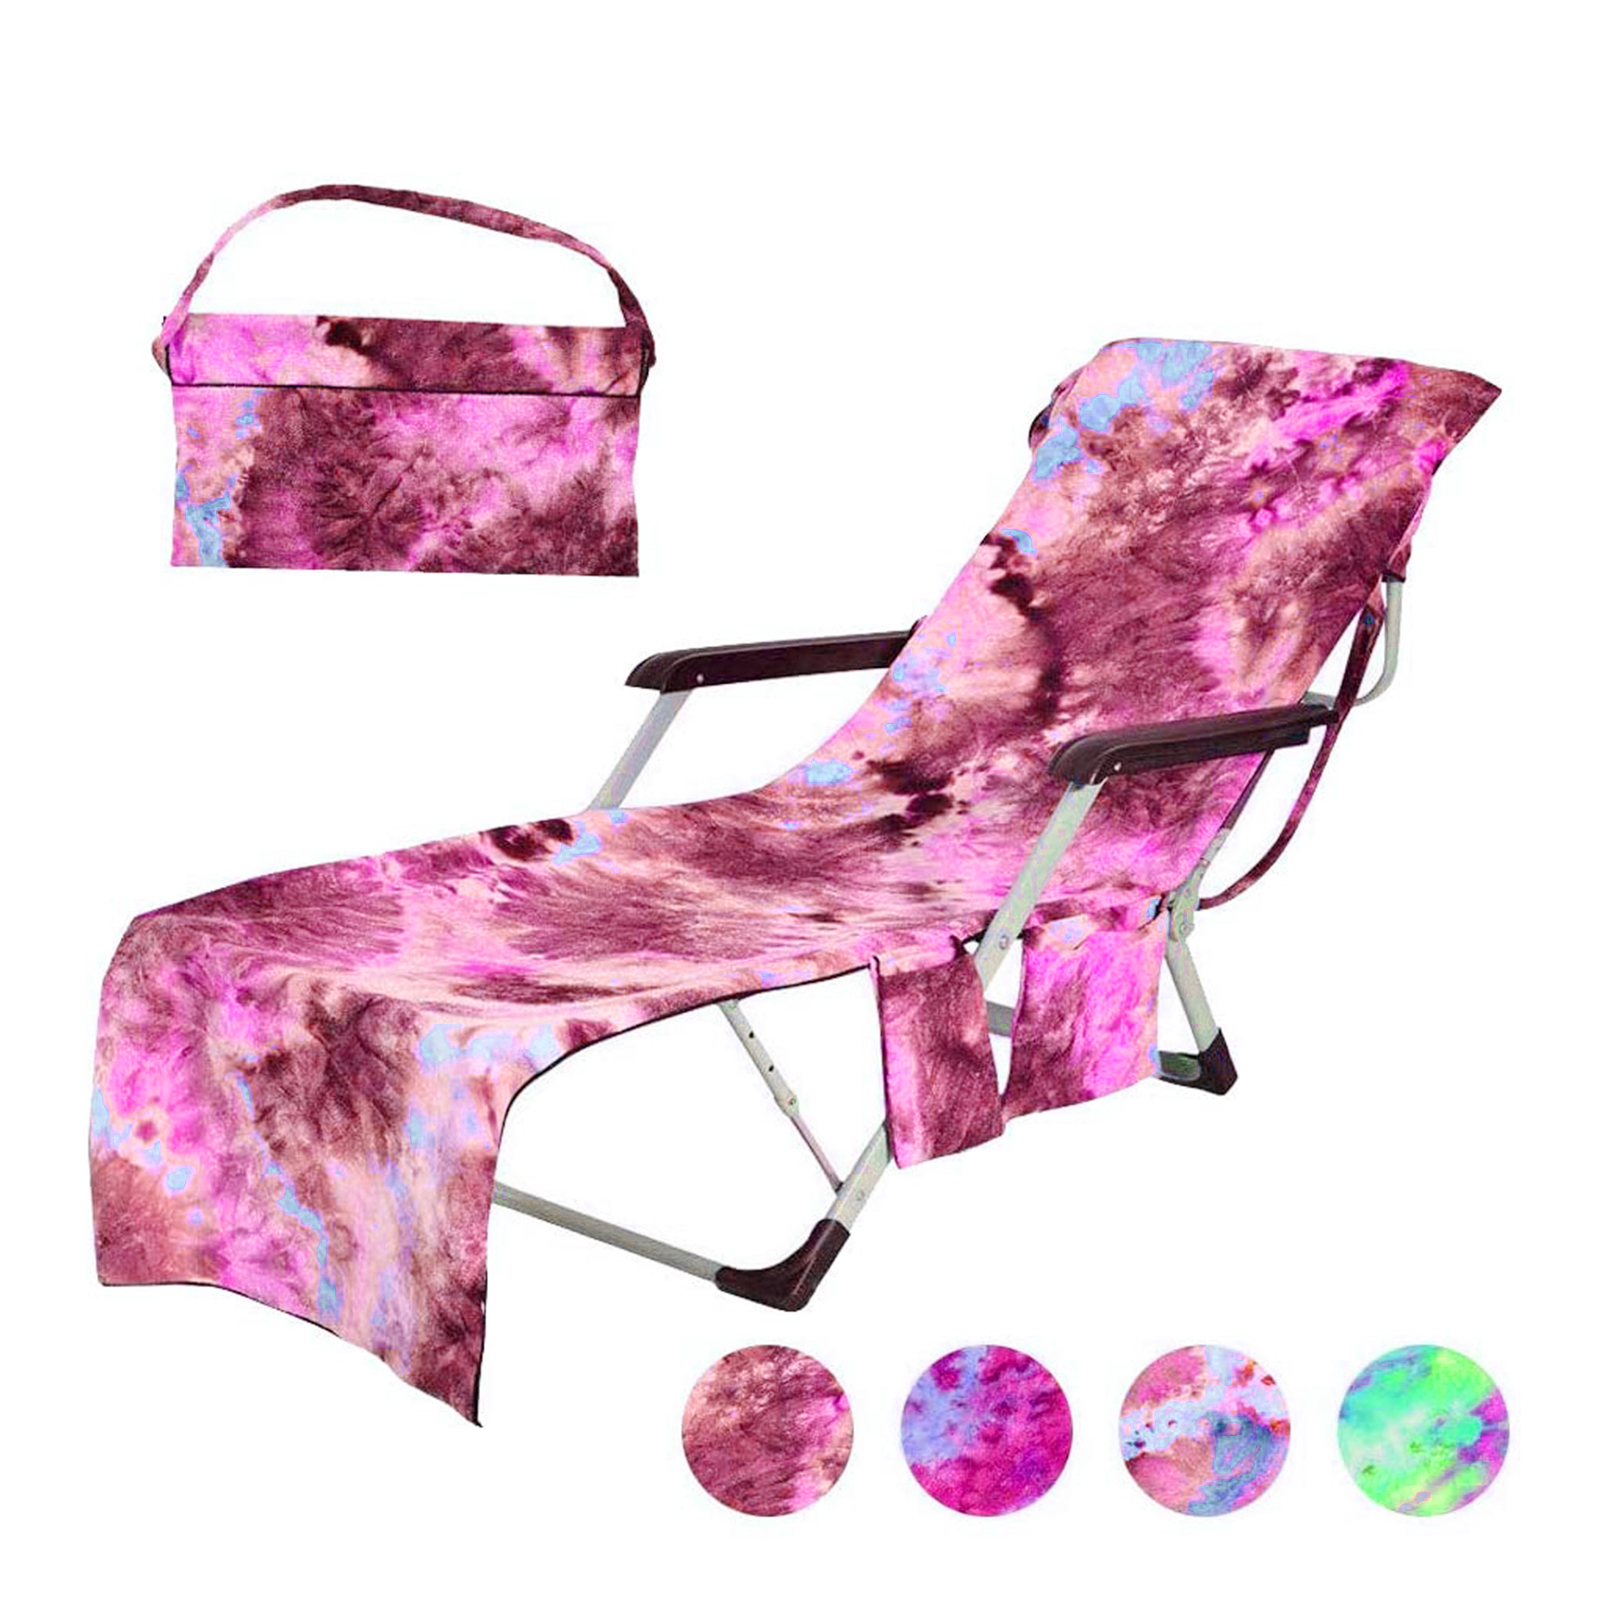 TINYSOME Microfiber Gradient Print Beach Chaise Lounge Chair Cover with Side Pockets No Sliding Quick Dry Bath Towel for Sun Lounger Pool Sunbathing Garden - image 1 of 20